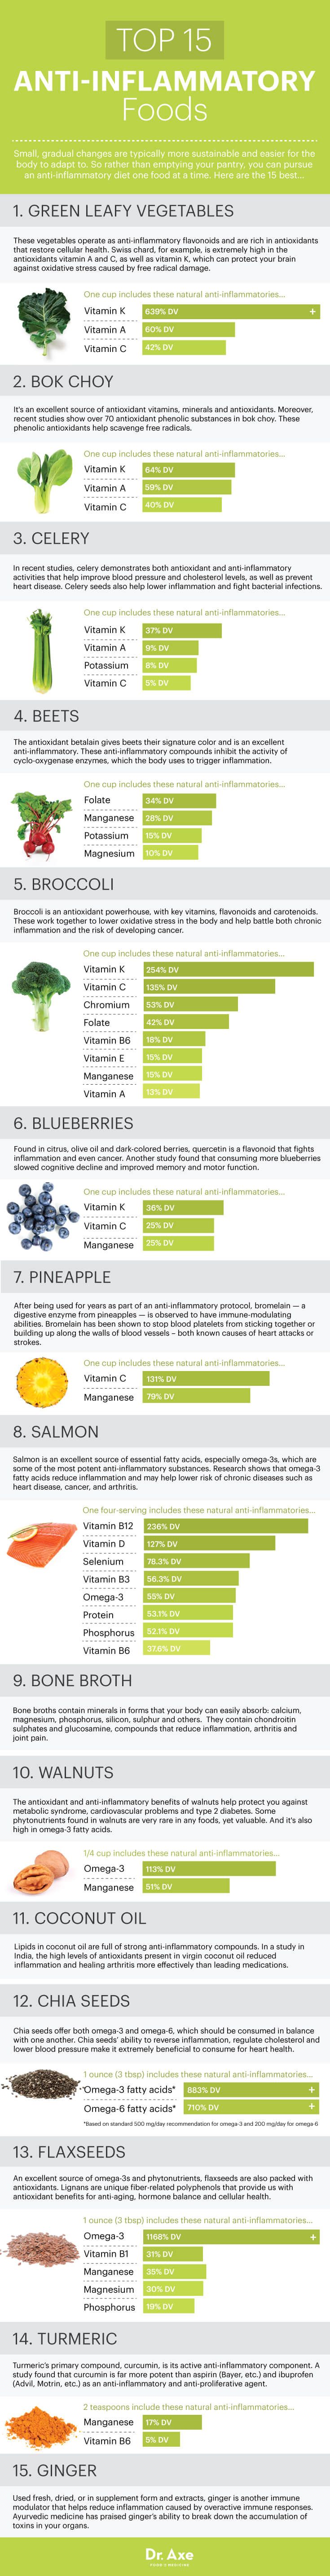 Top 15 Anti-Inflammatory Foods And Their Benefits Infographic